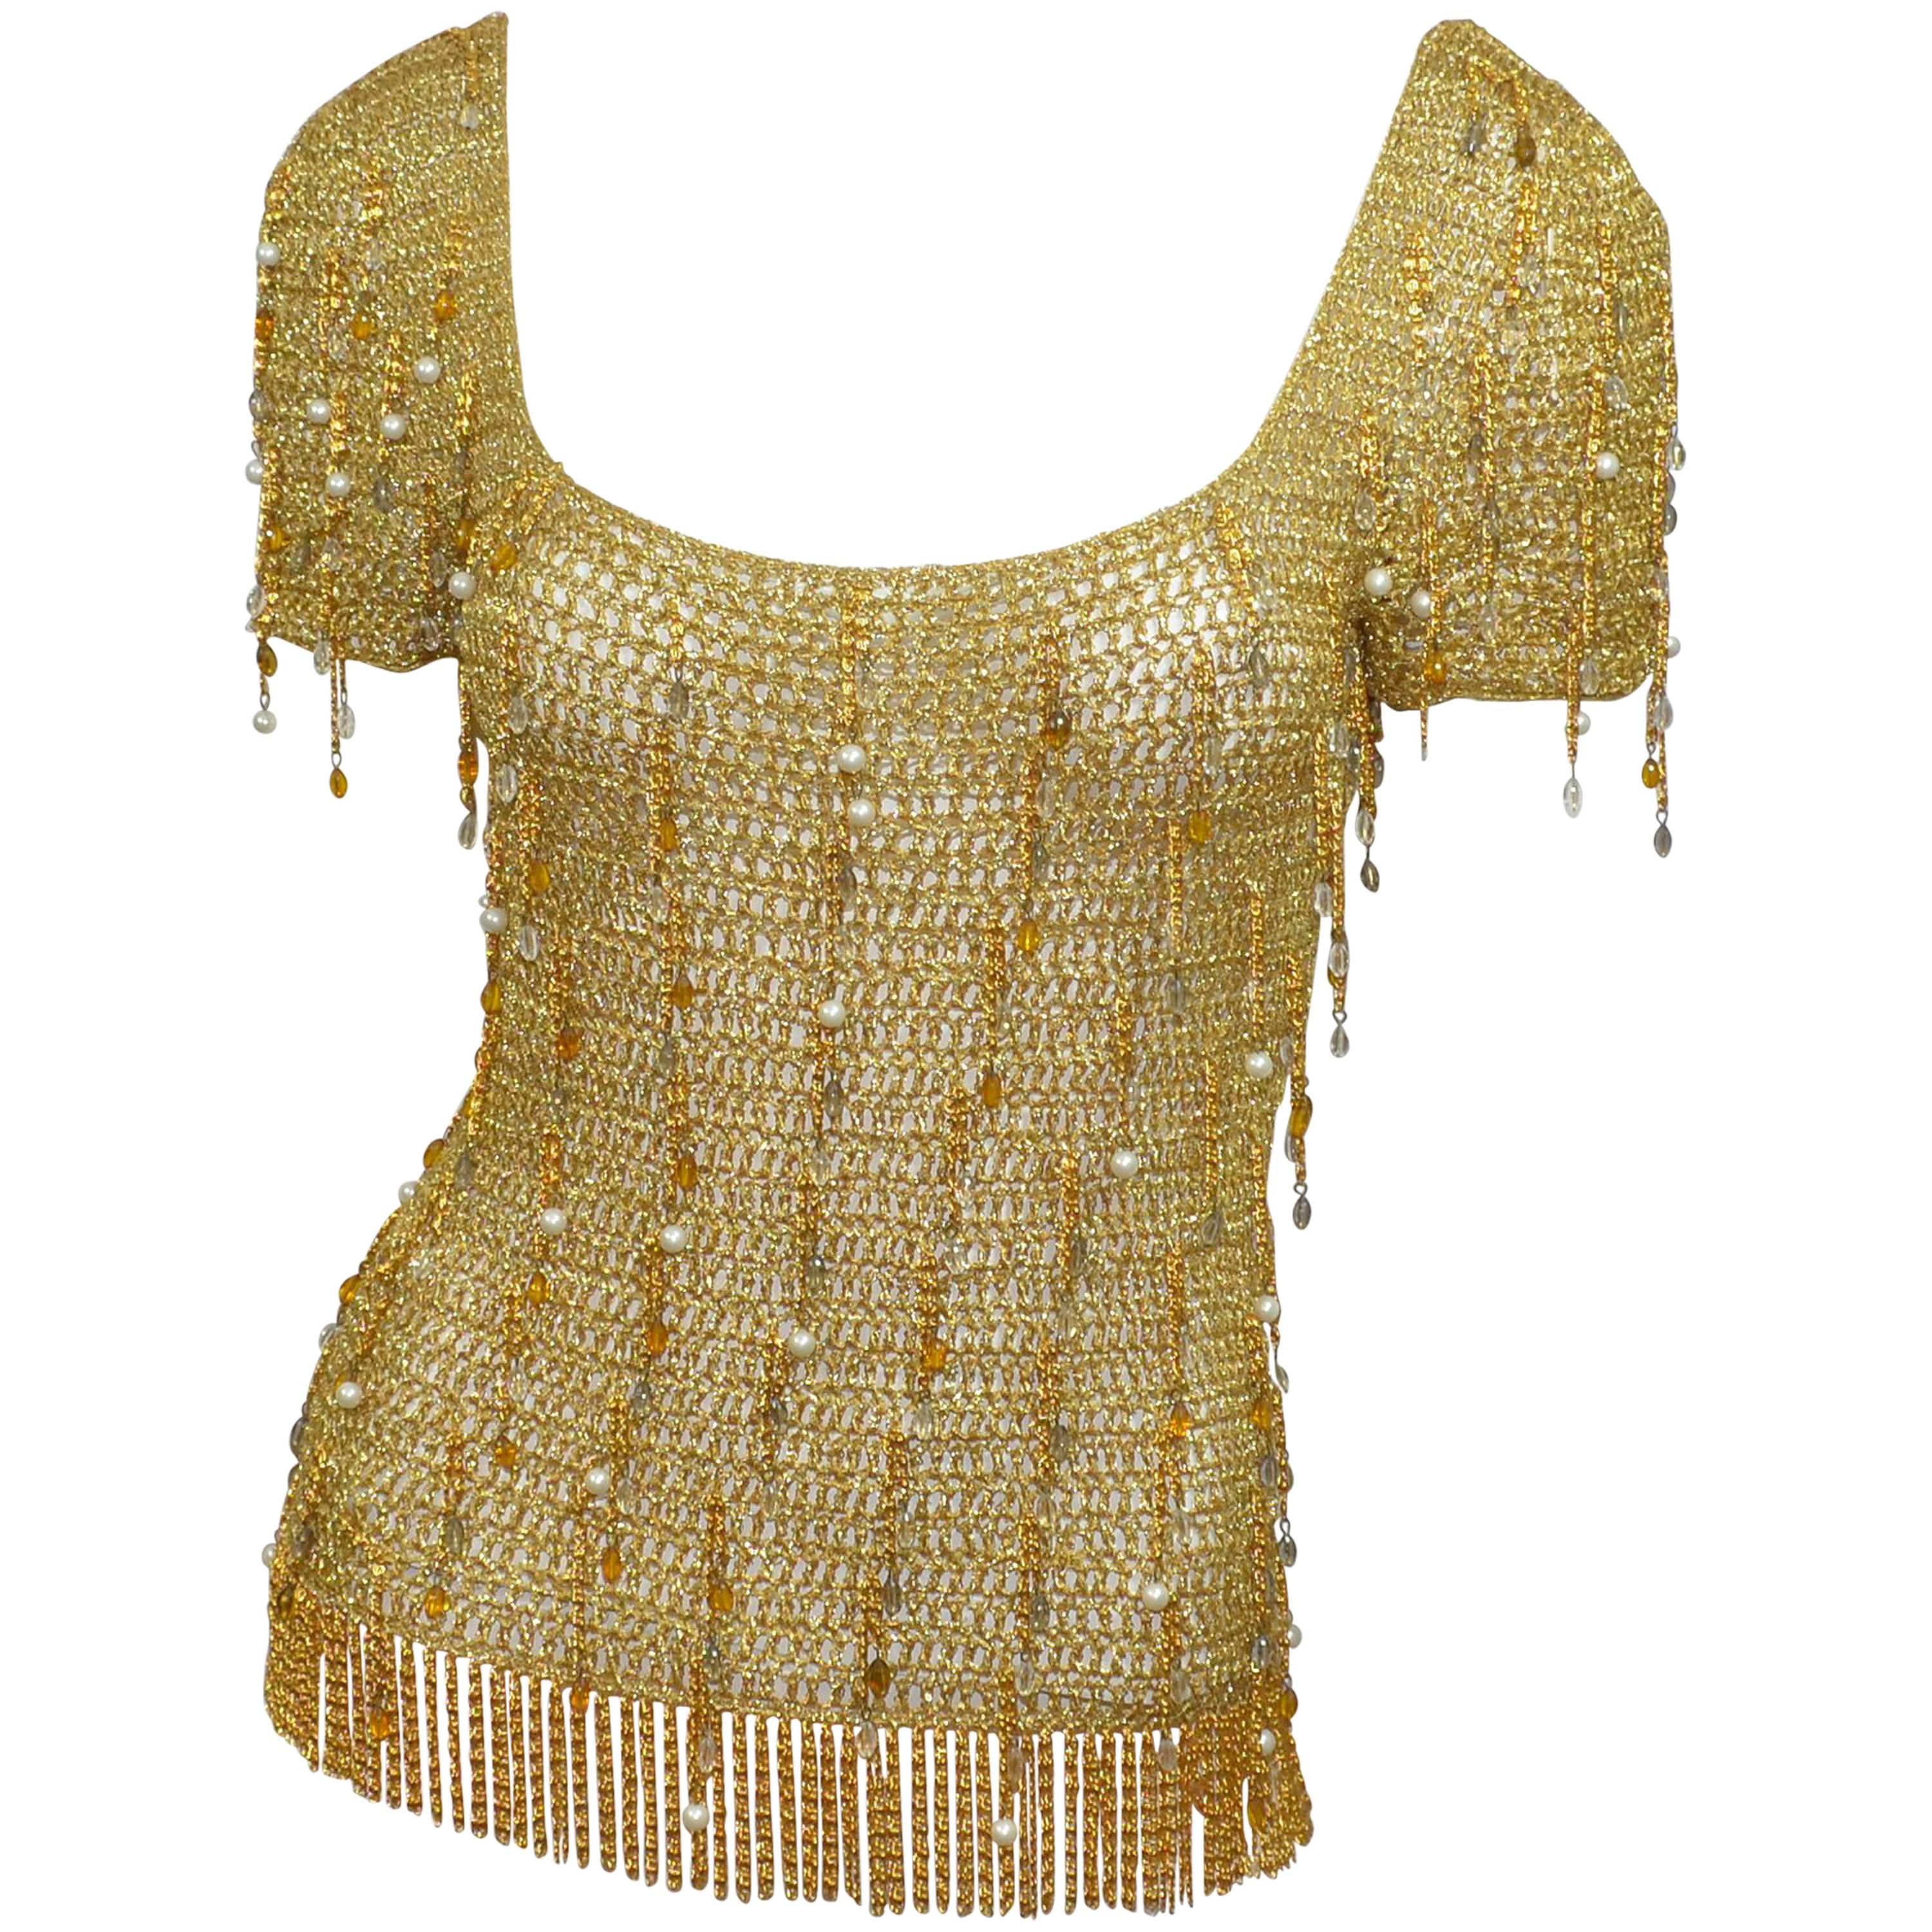 Loris Azzaro 1970s Vintage Gold Knit Chain Top For Sale